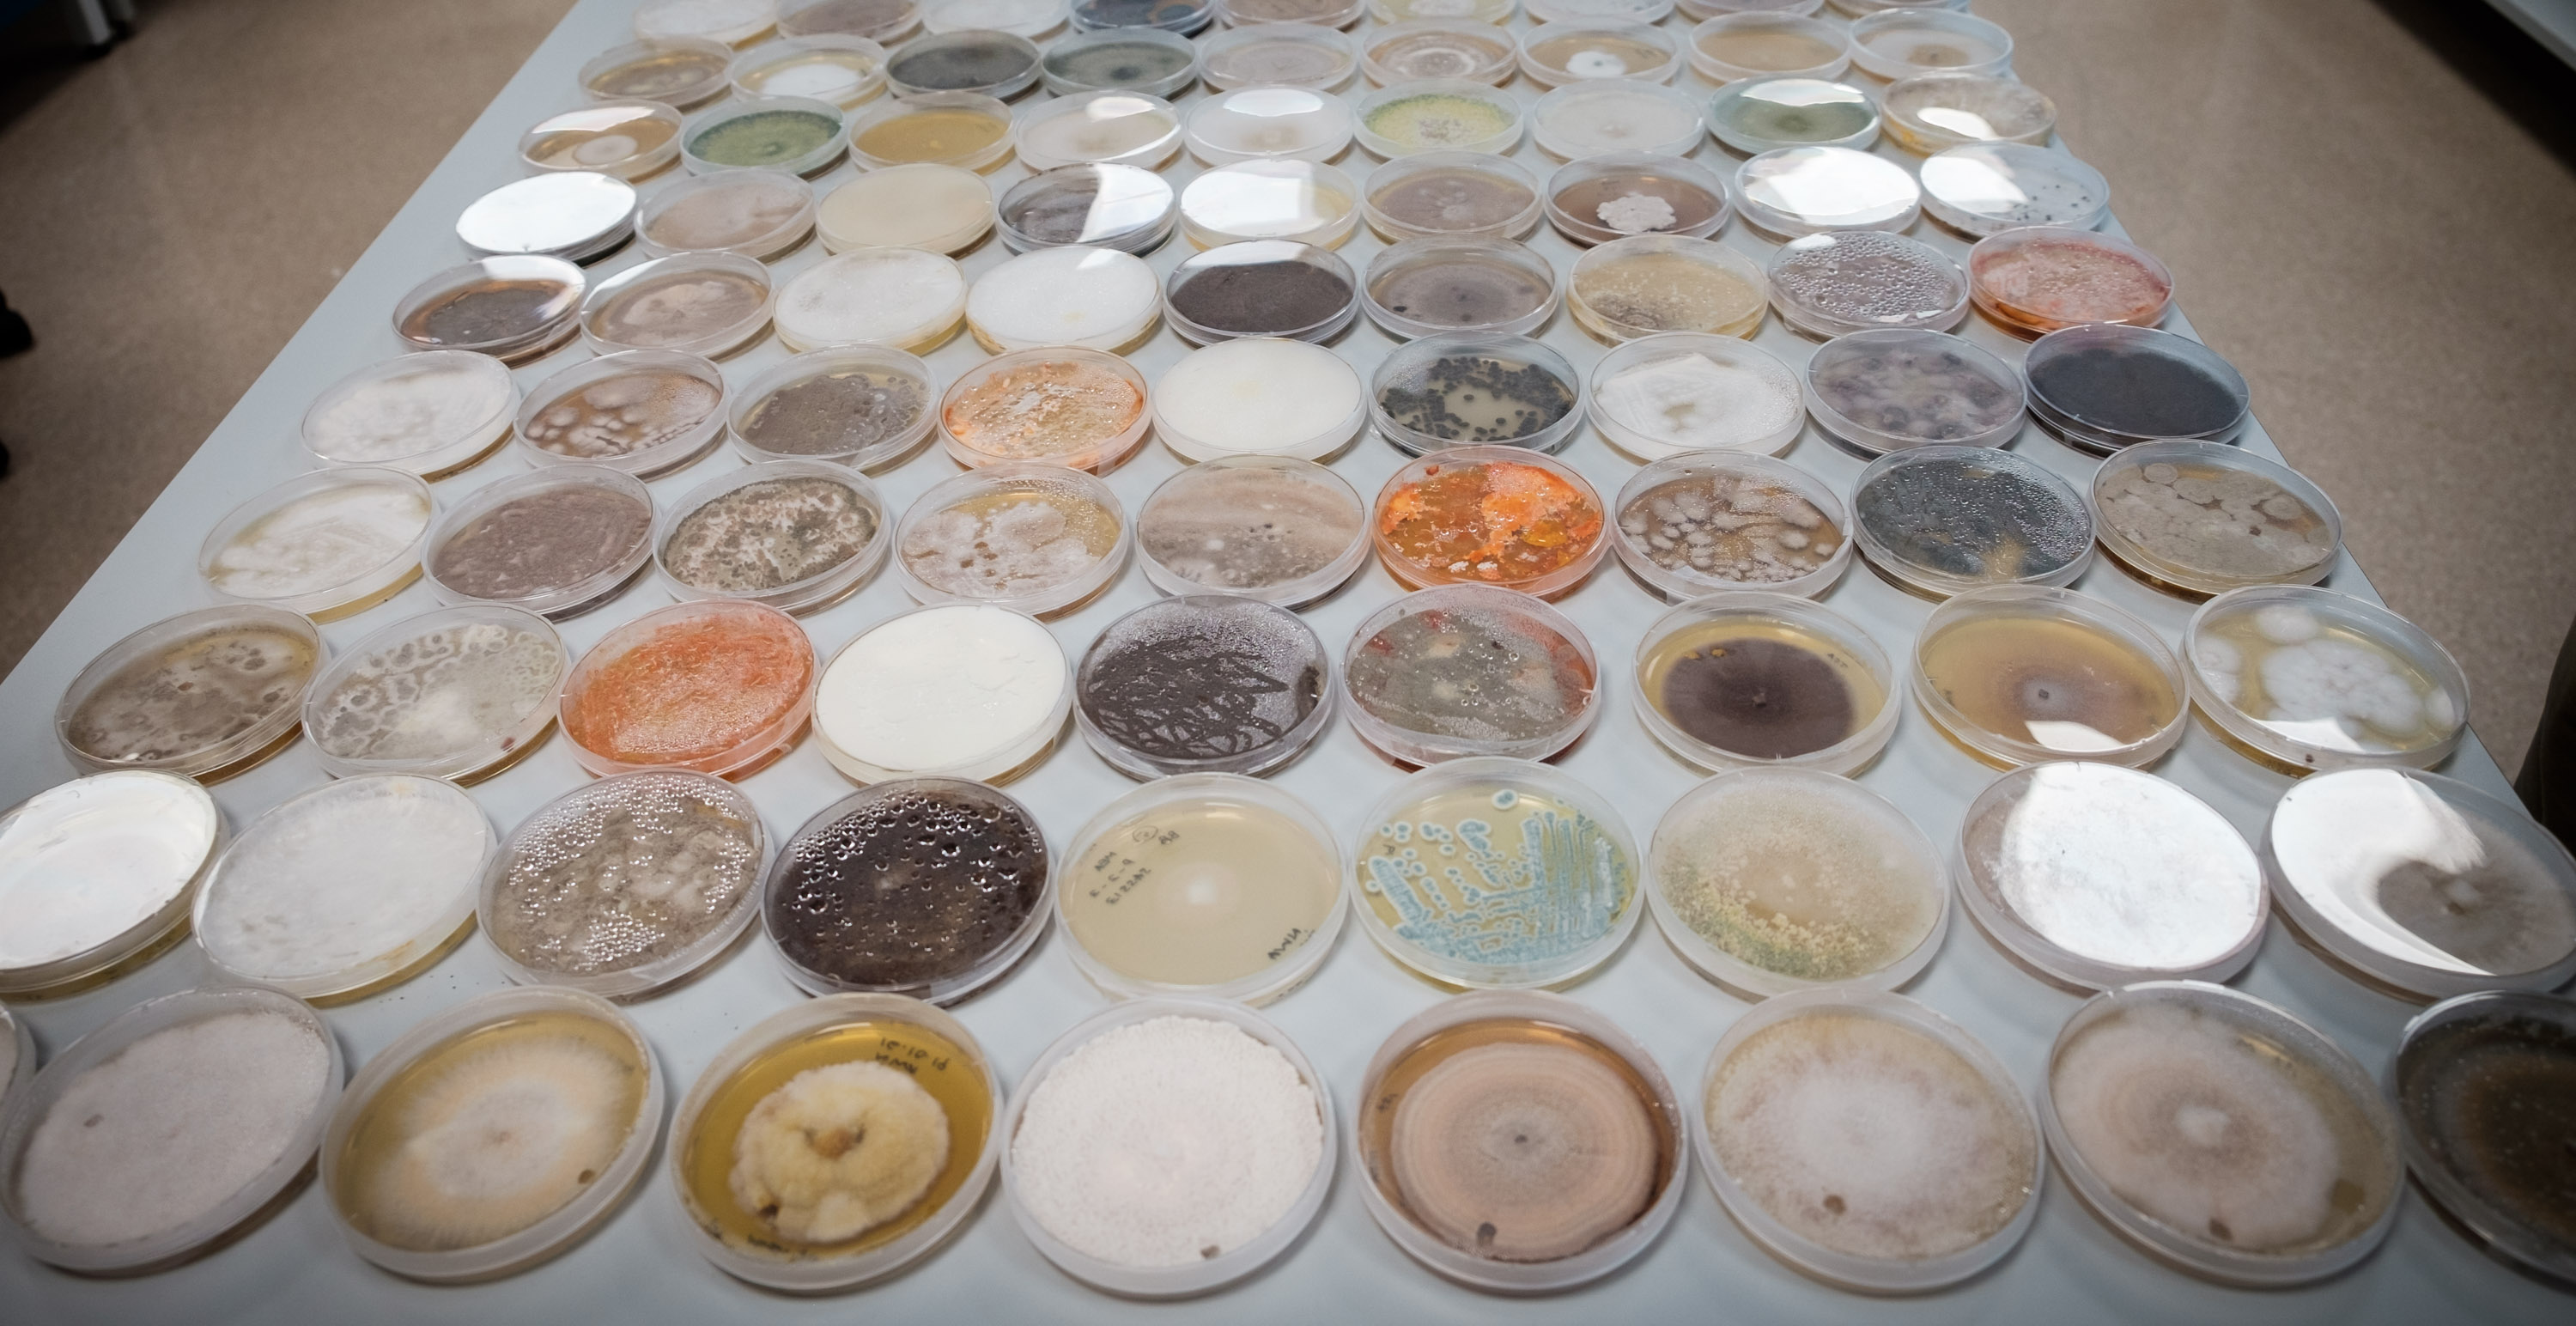 Rows of petri dishes with fungal and bacteria cultures collected from air. 